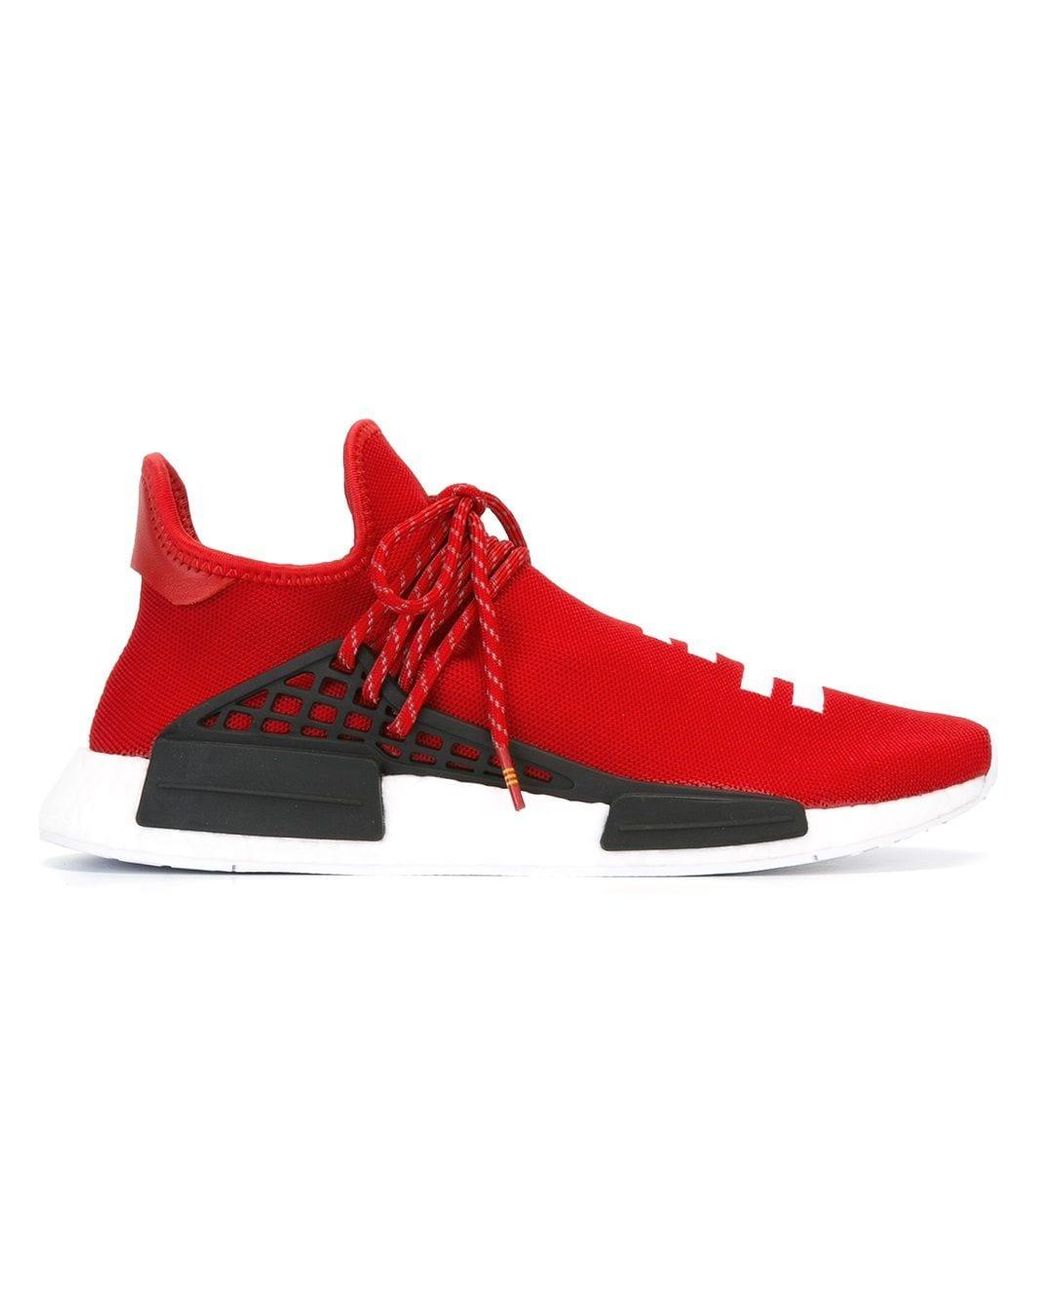 adidas Rubber Pharrell X Hu Nmd Red Human Race Sneakers for Men - Save 41%  | Lyst